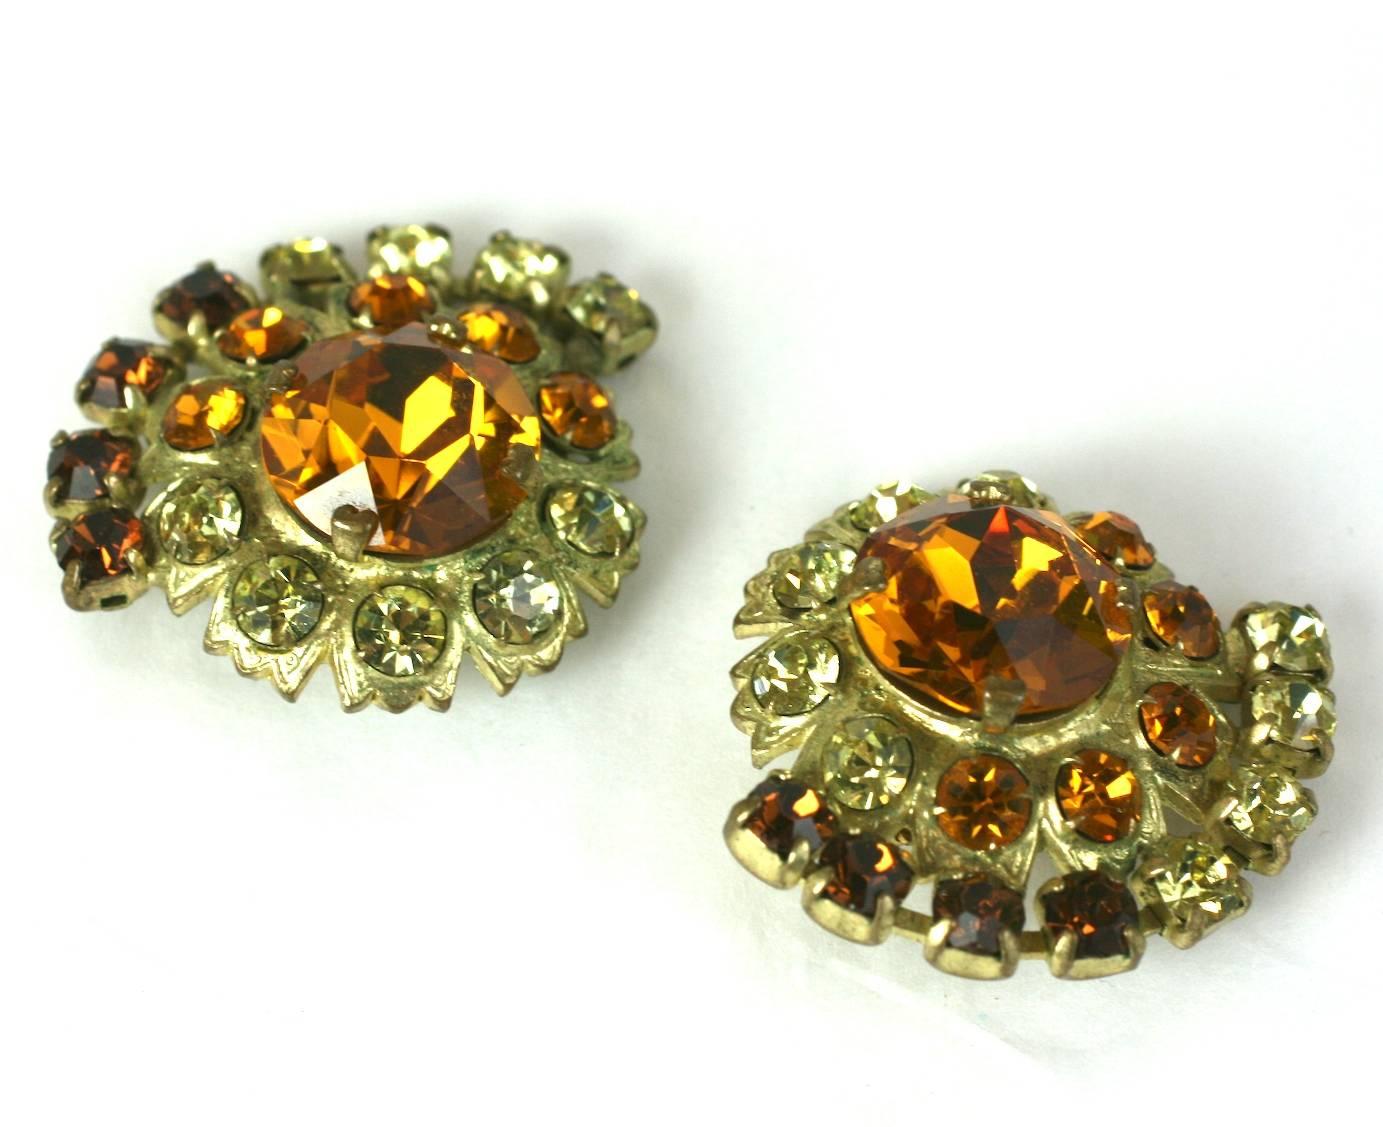 Countess Cis Citrine Paste earclips. Countess Cis is known for unusual color combinations and striking designs. Wonderful, varying shades of citrine and topaz. Signed 